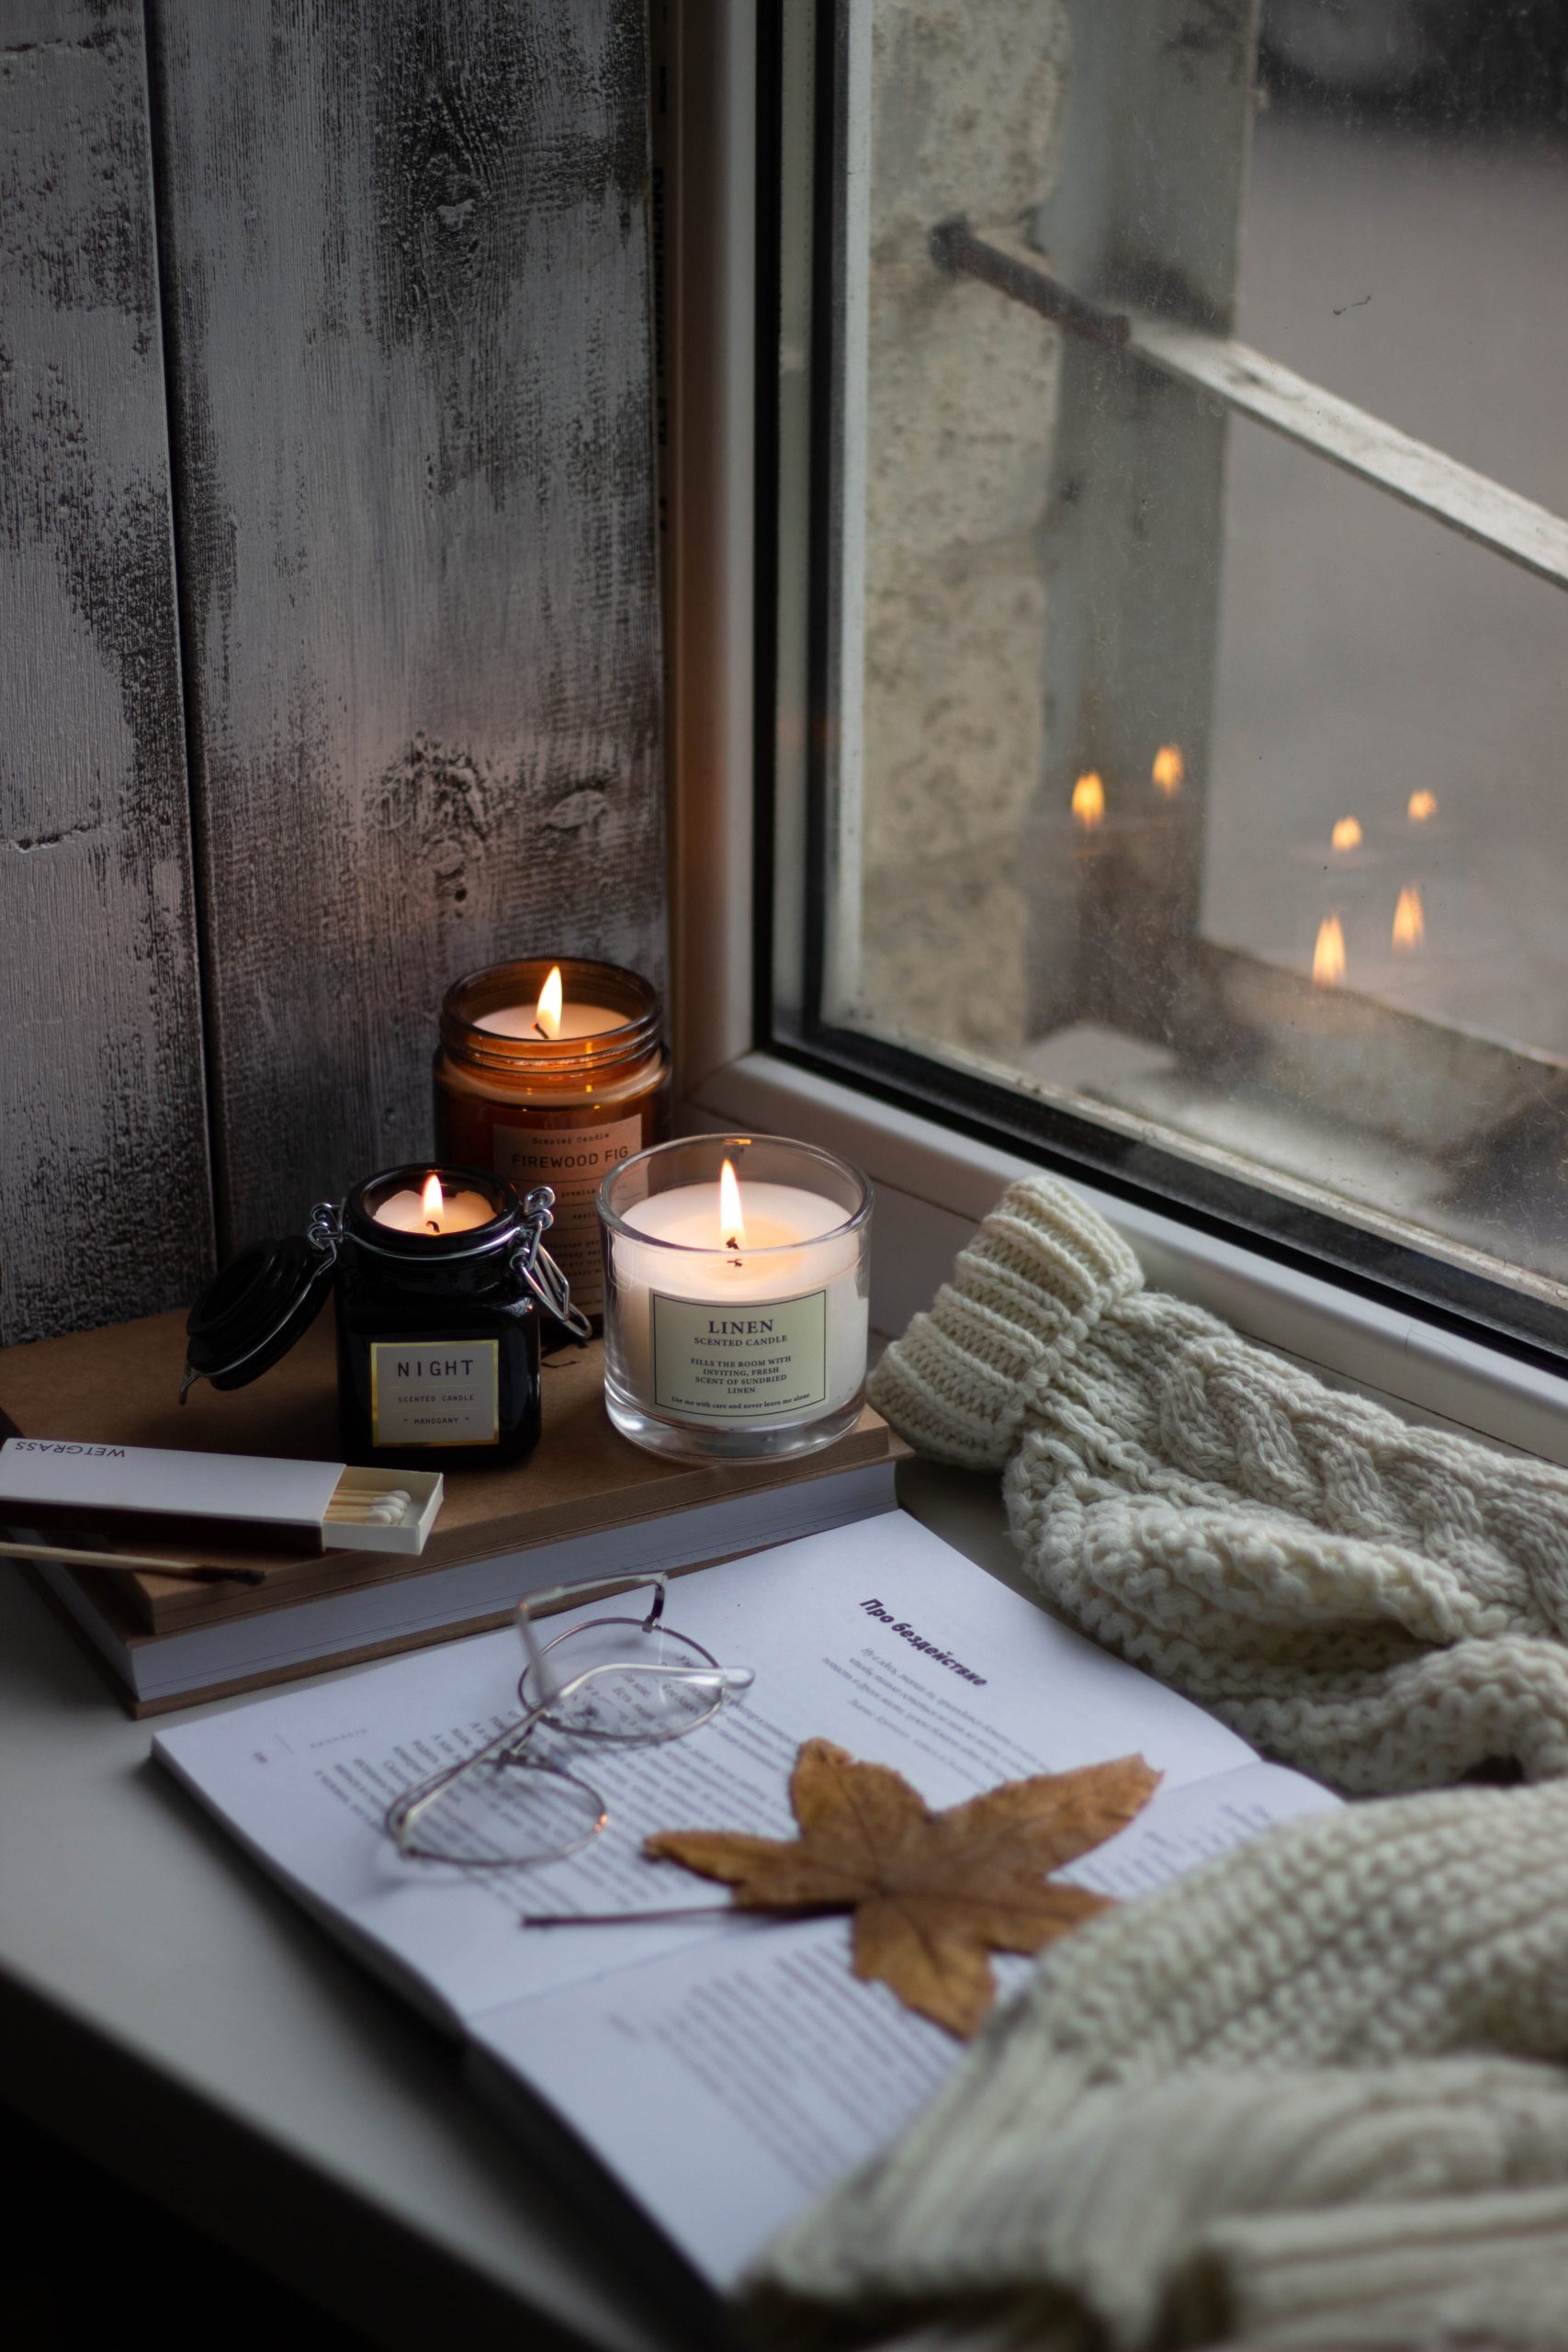 You'll Never Want to Leave Home After Adding Hygge to Your Interior Design